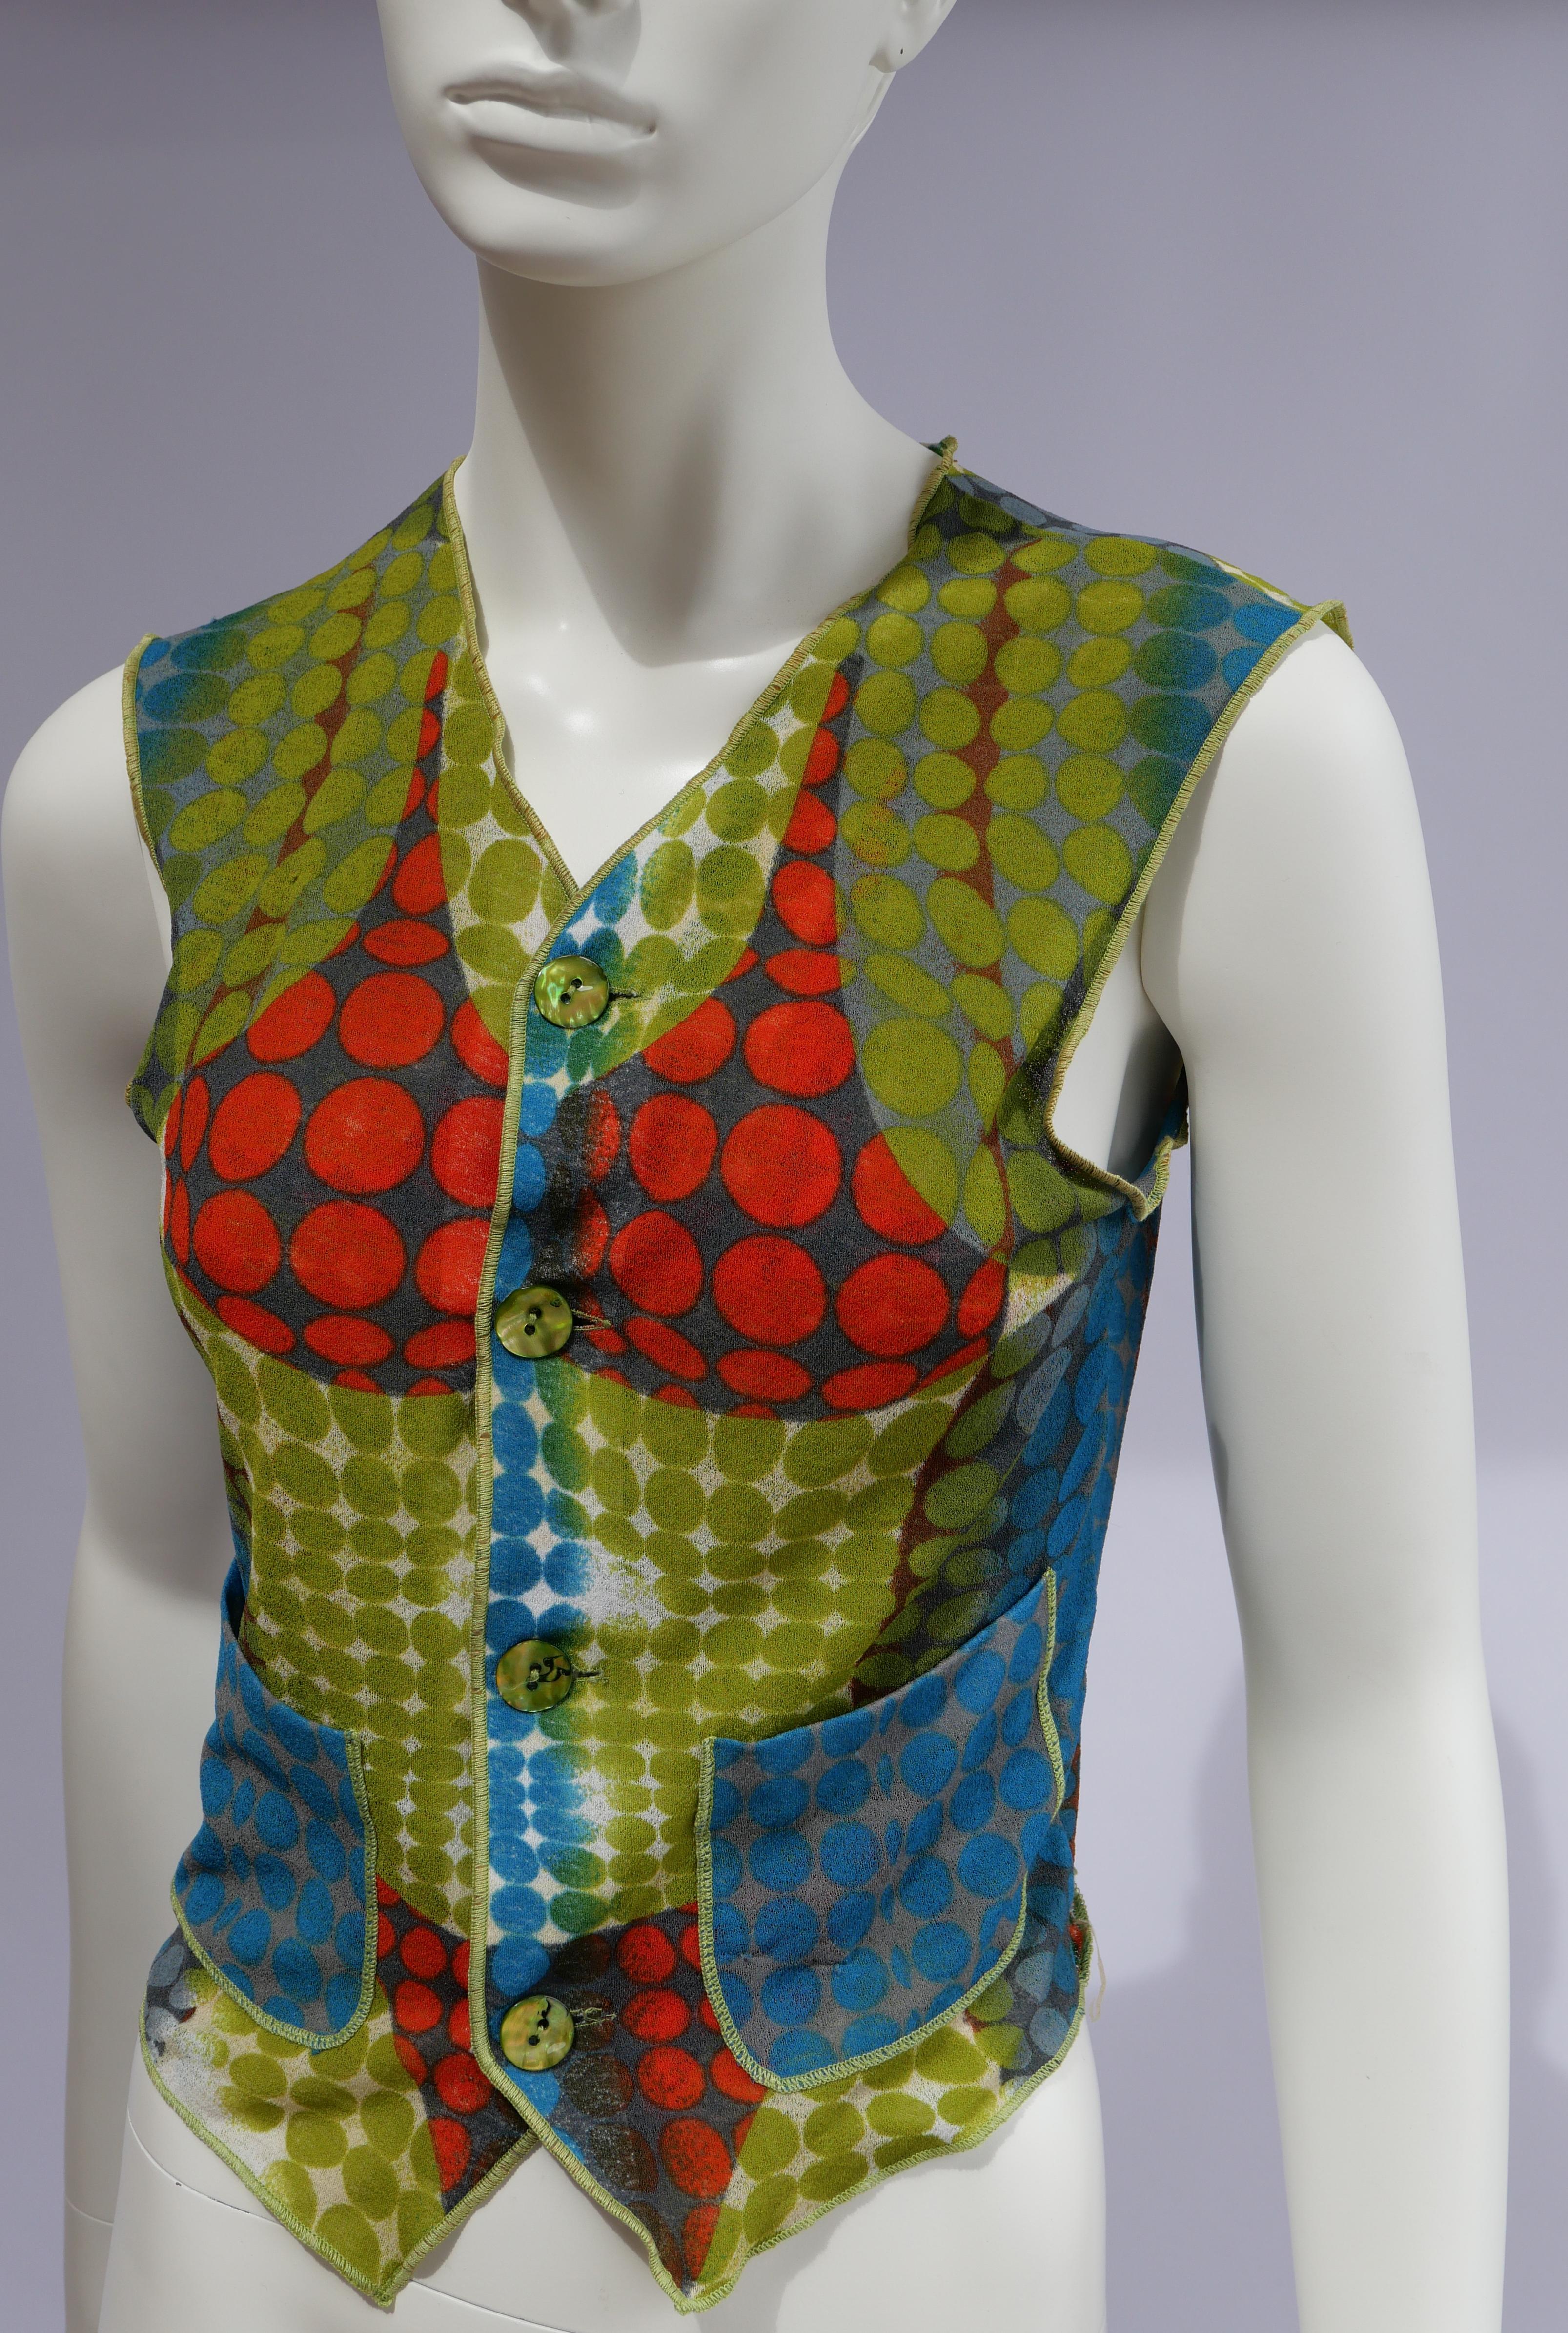 Jean Paul Gaultier Cyber Vest Top 1995AW 
This piece is from the Fall/Winter 1995 'Cyber' collection by Jean Paul Gaultier. Within this collection Gaultier references technology and a dystopian future. The print on this top is inspired by the work